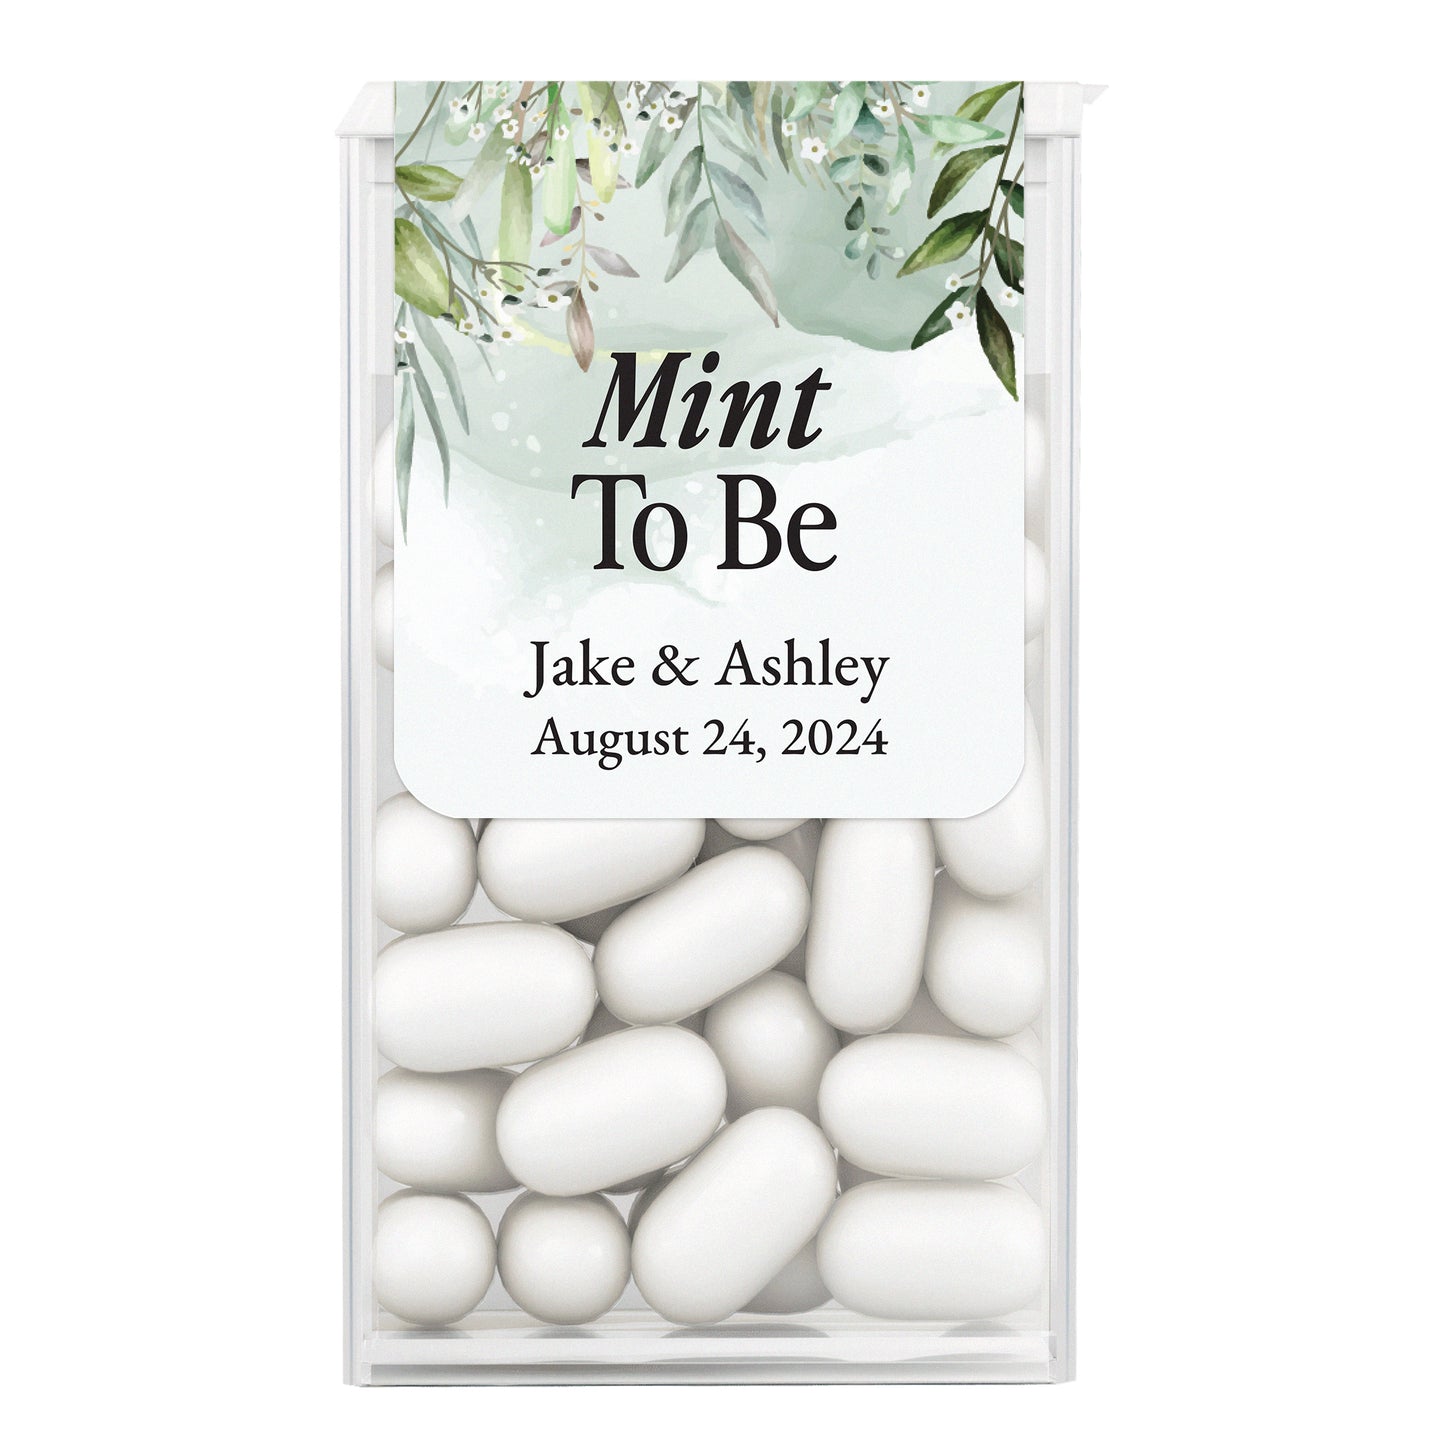 Enchanting Mint to Be stickers for Tic Tac boxes, featuring elegant greenery-colored backdrop with delicate floral branches and refined calligraphy, perfect for fairy tale-inspired wedding favors.